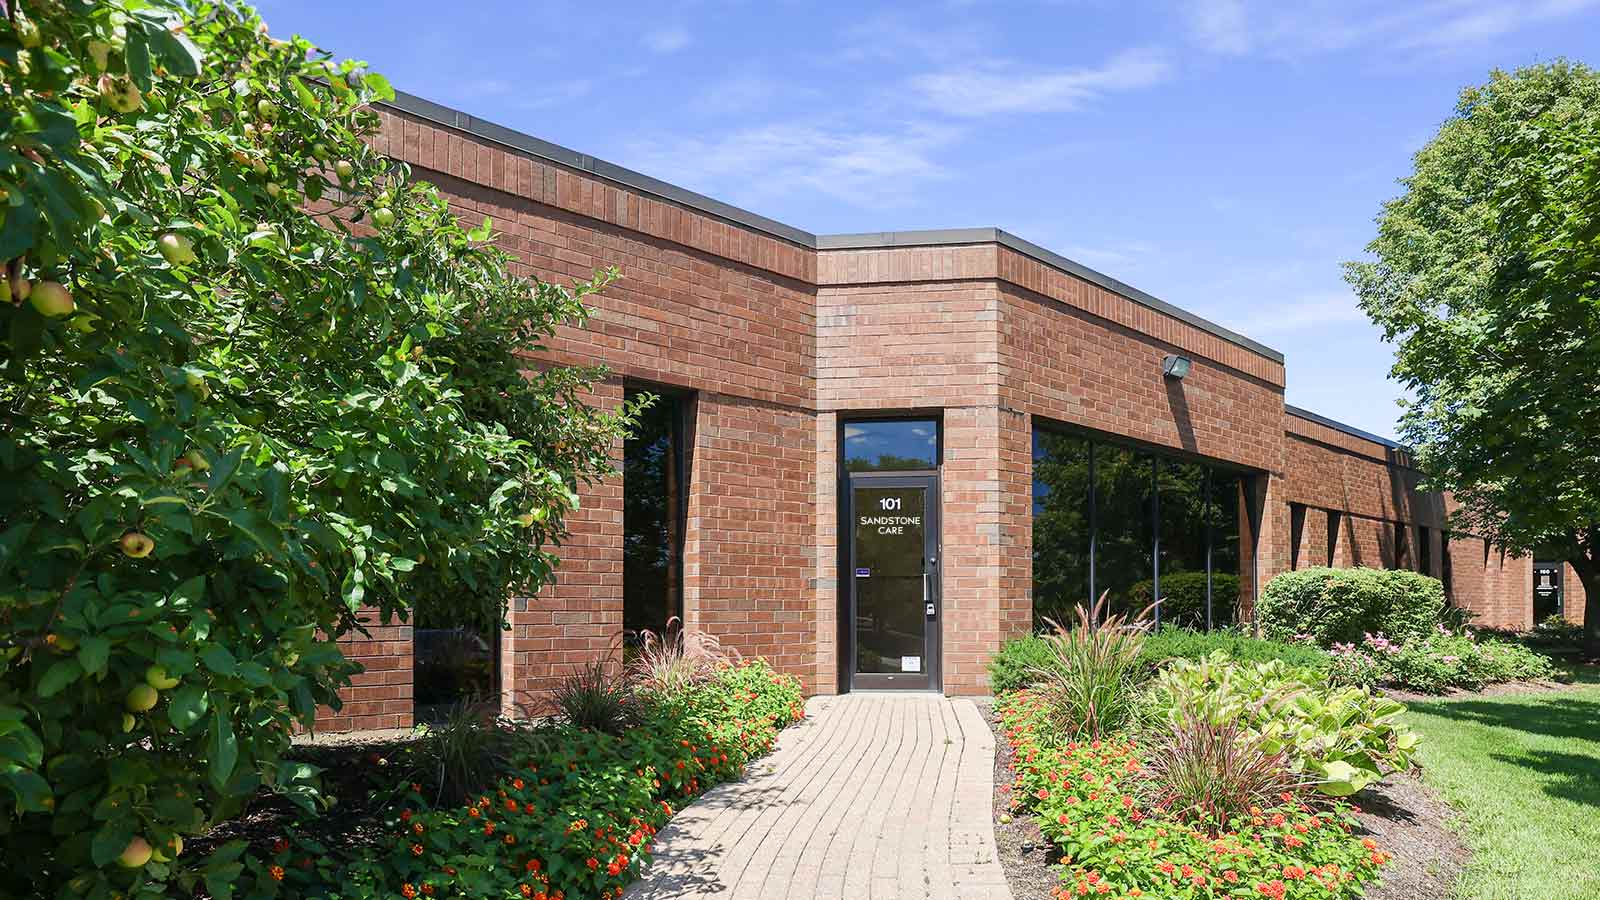 A single-story brick building with a clear entrance pathway lined with flowering shrubs.